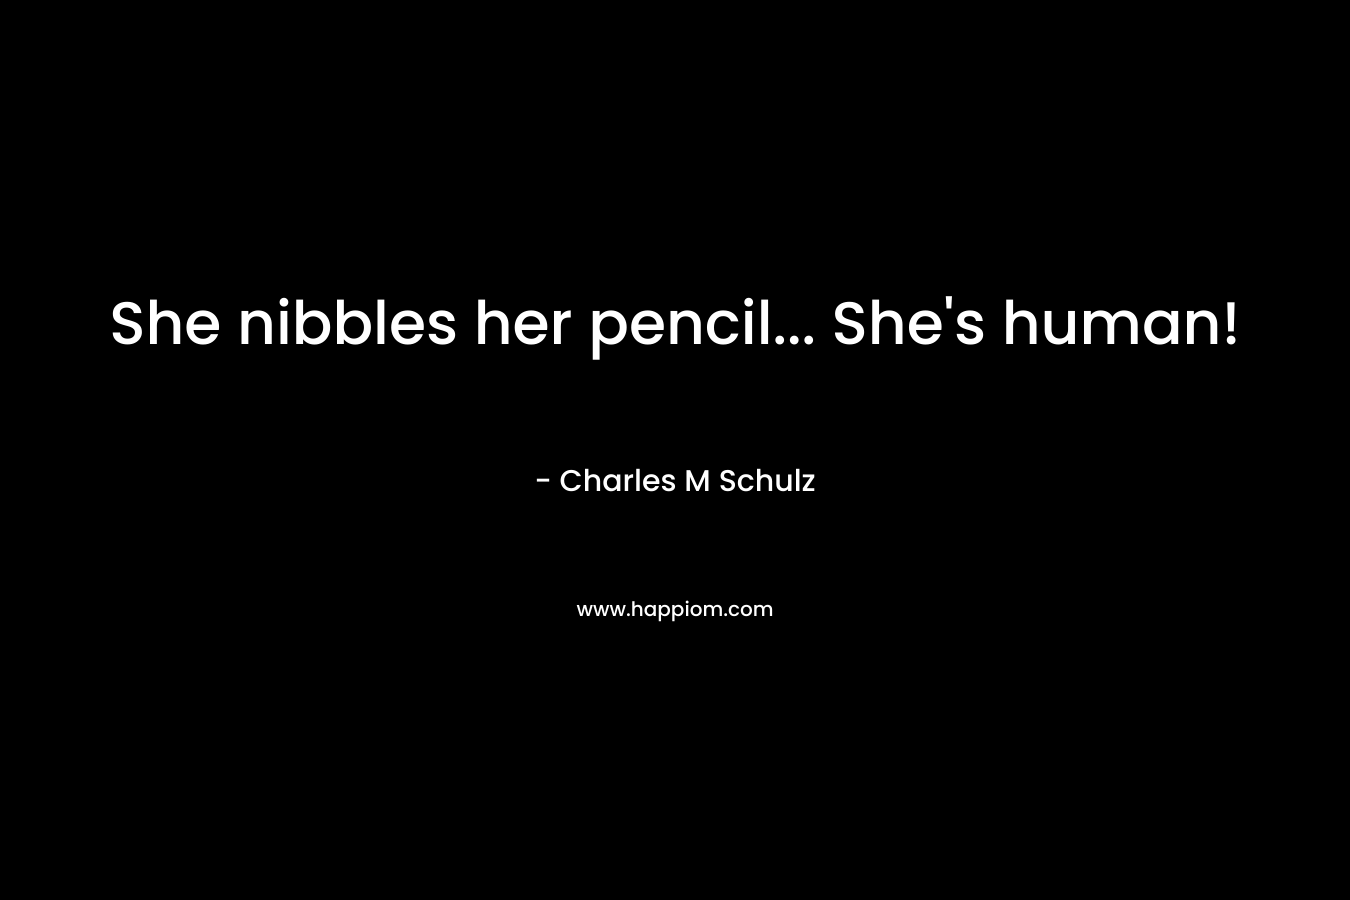 She nibbles her pencil... She's human!